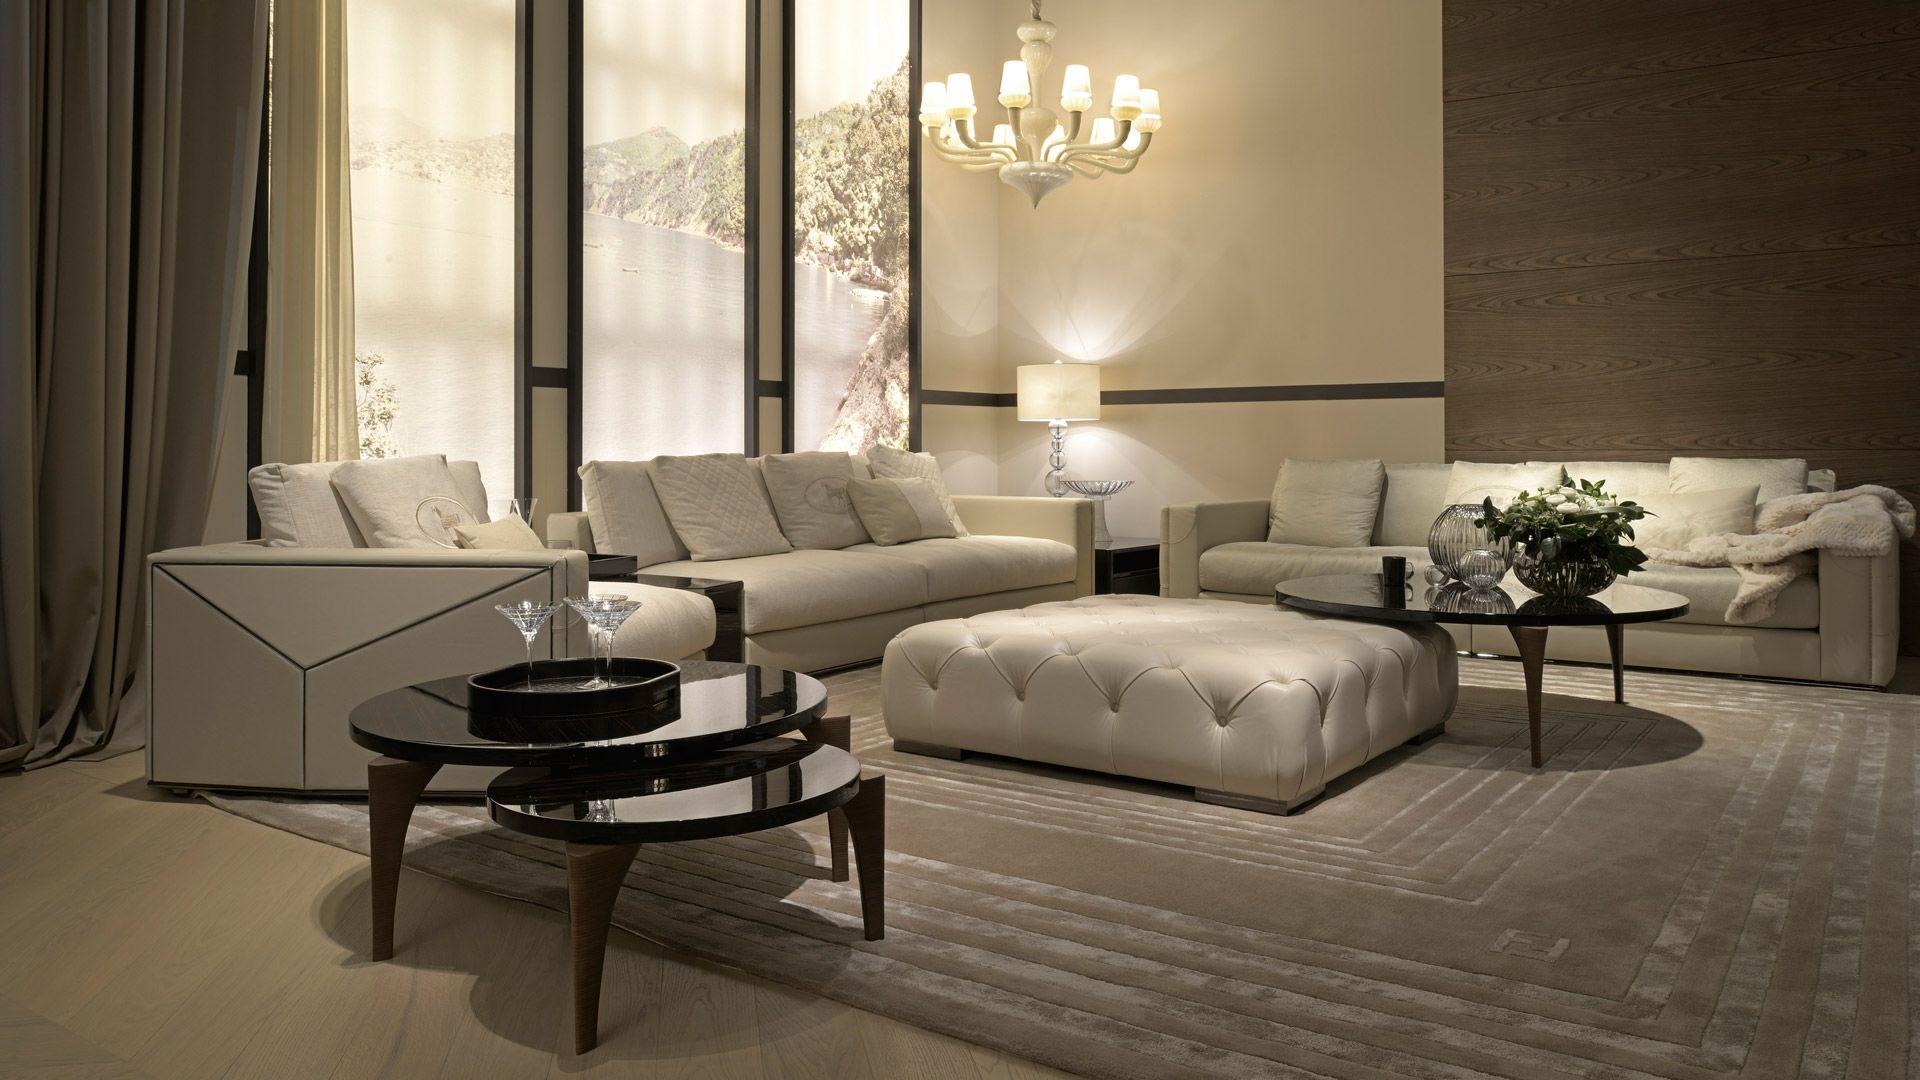 Modern Versailles Sofa Cream Leather Handmade in Italy by Fendi

Plaza Versailles Materials
Frame: Wood padded with Polyurethane and Fiberfill
Seat: Interwoven elastic belts; cushion in down feather and Polyurethane and Fiberfill
Back+Backrest